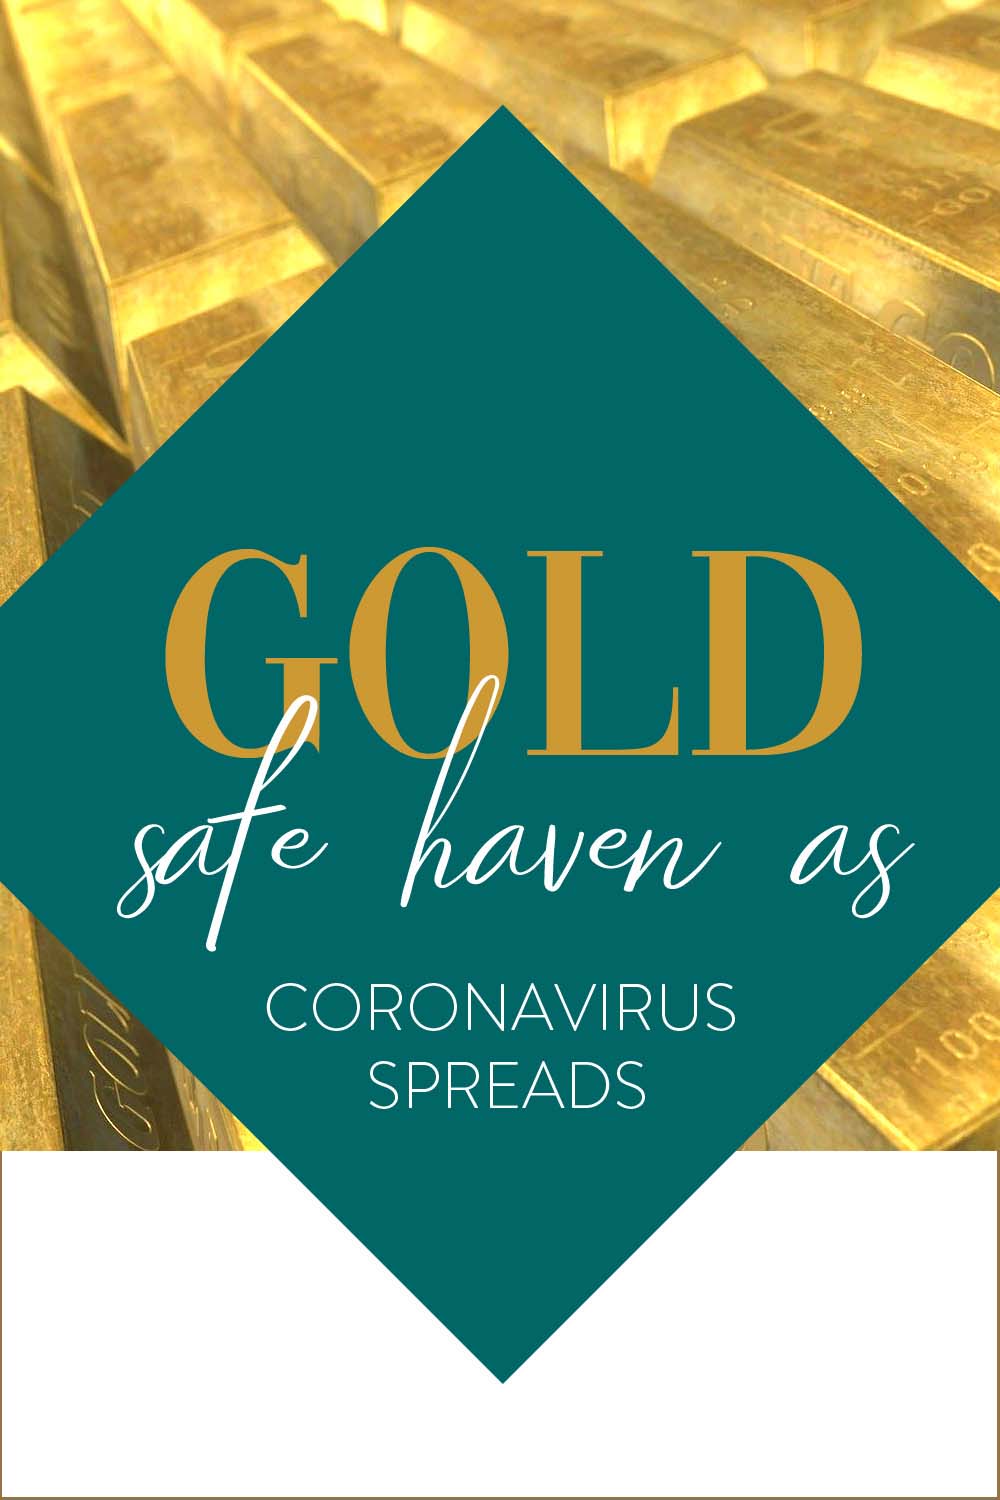 Gold Safe Haven As Coronavirus Spreads, Oil Crashes, Global Recession - Protect Your Assets Now